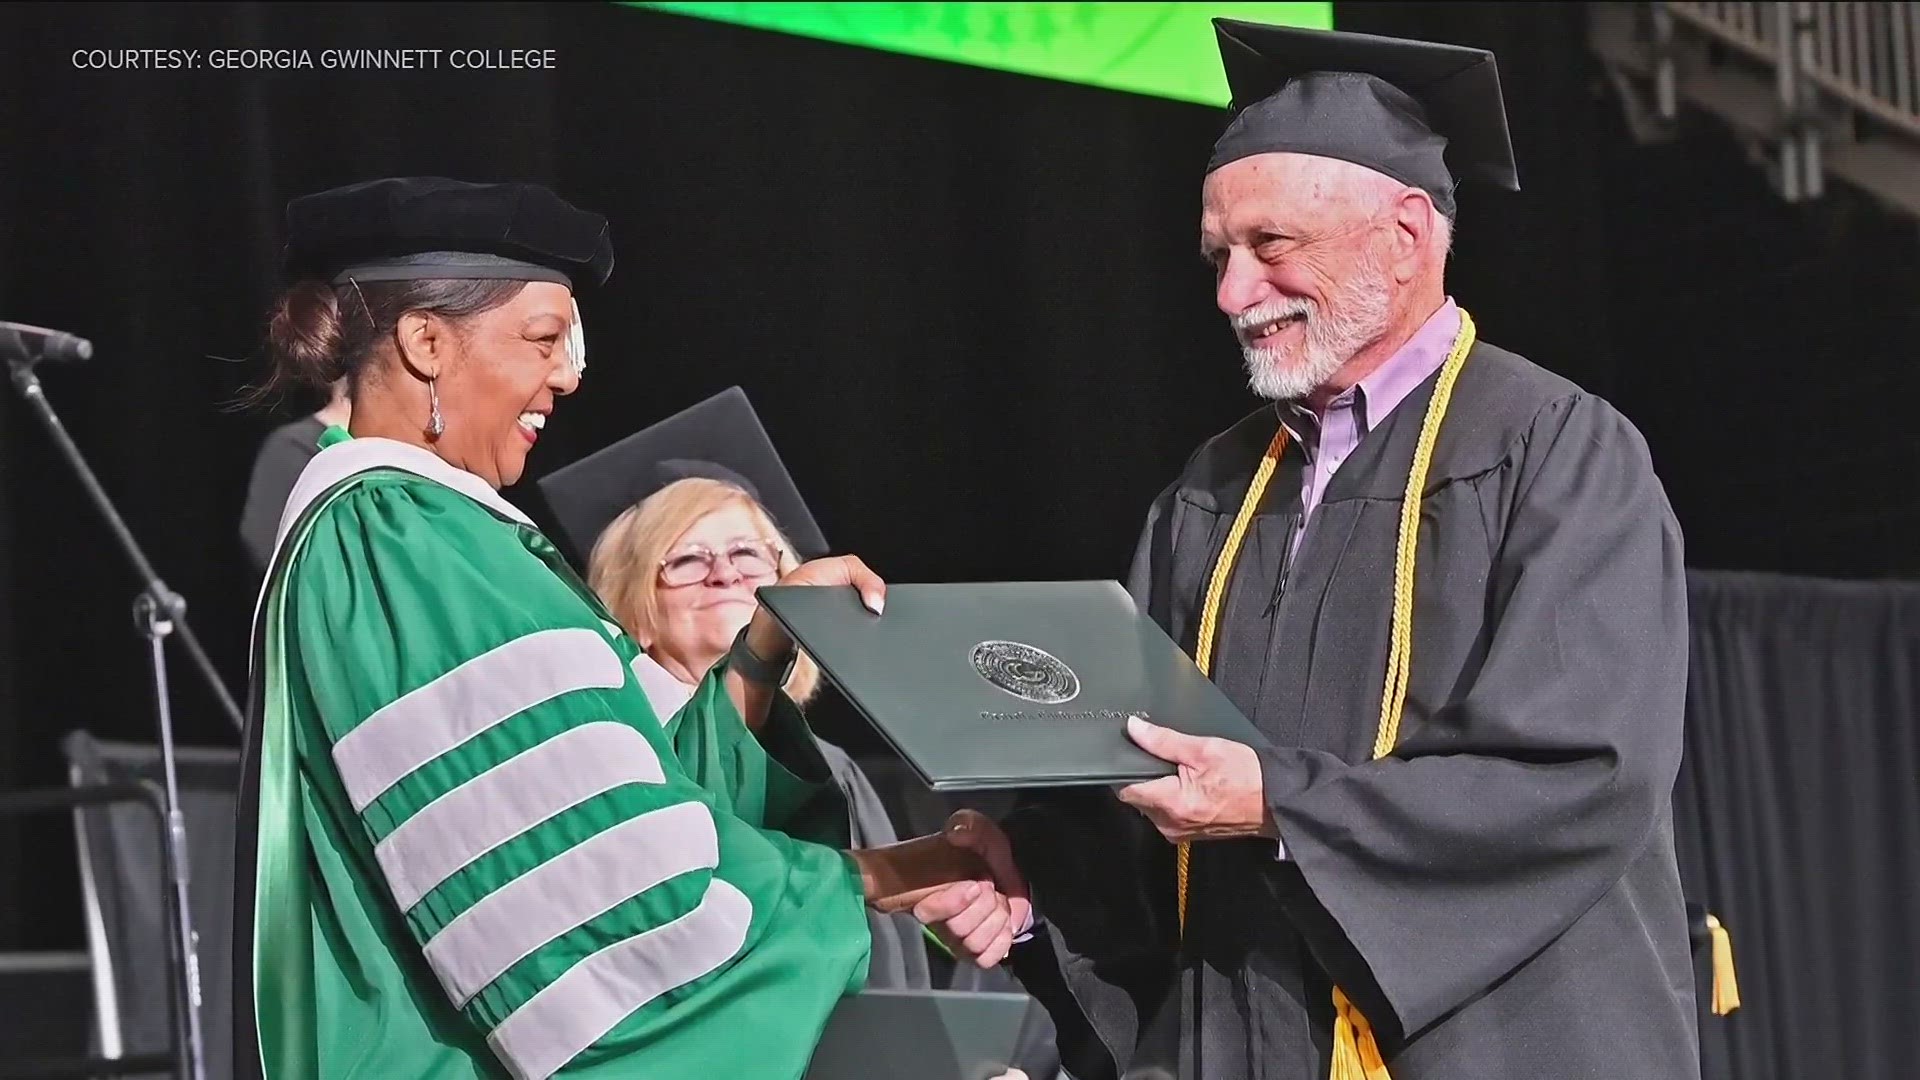 Sam Kaplan earned his Cinema and Media Arts degree from Georgia Gwinnett College Thursday. Kaplan decided to return to school after hearing a radio ad.